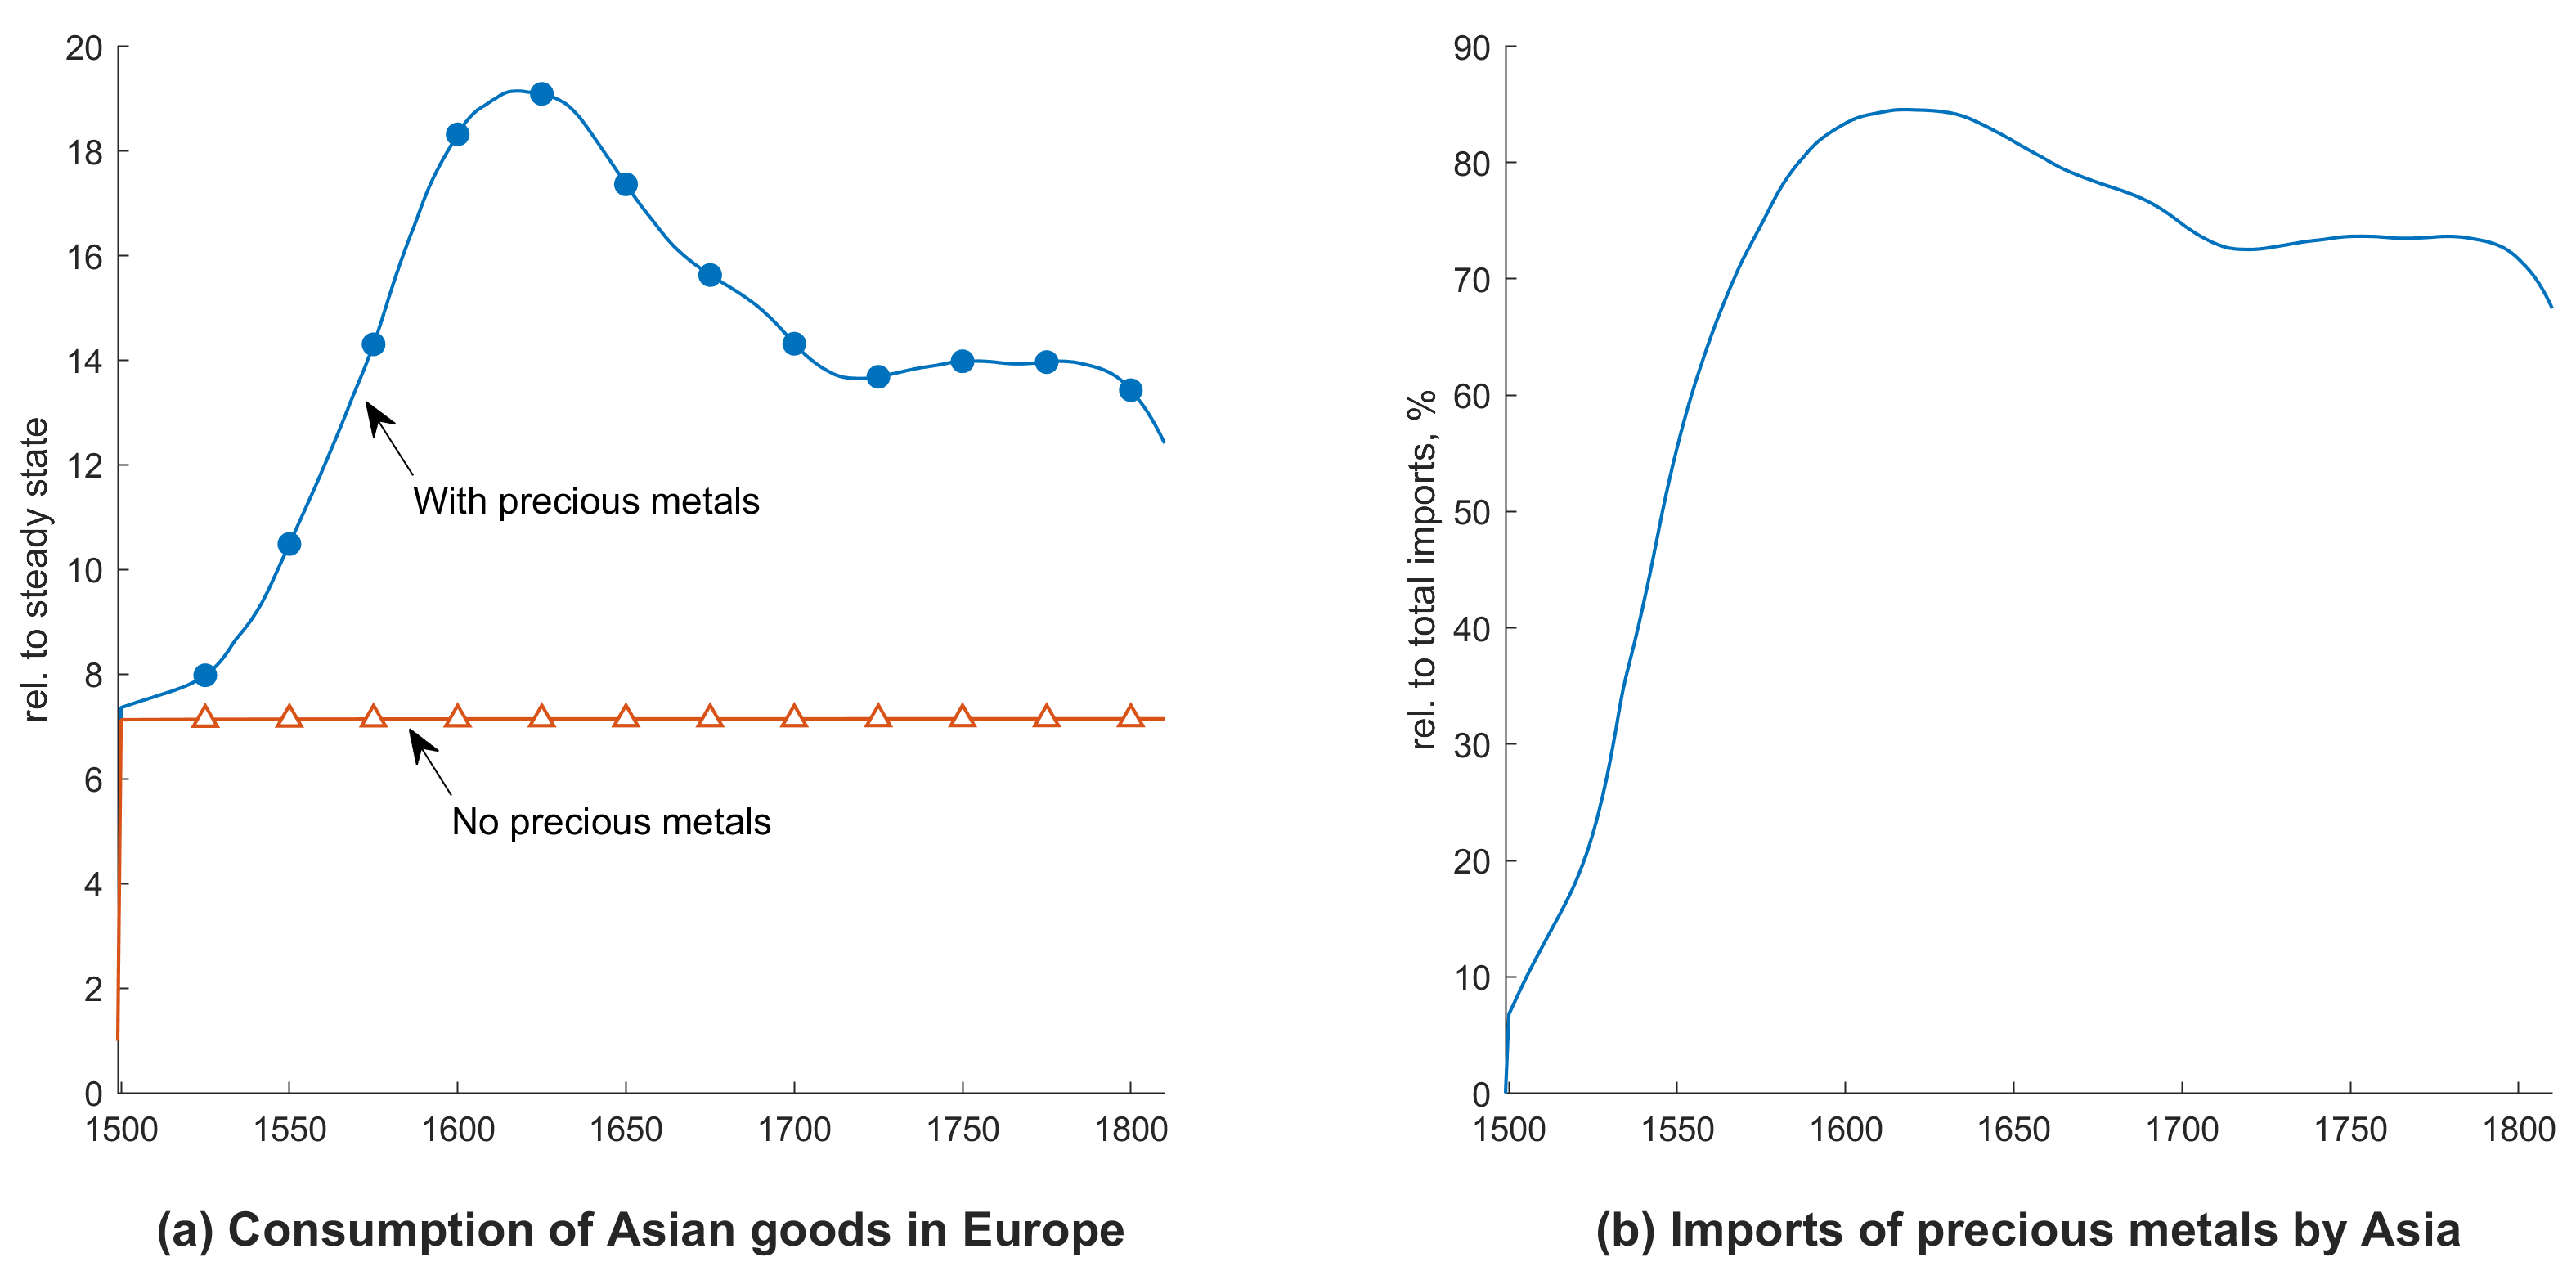 Figure 2a New precious metals allowed Europe to increase consumption of Asian goods by 20 times from medieval levels and more than double its level without precious metals (panel a). Most of the imports of Asia were in the form of precious metals (panel b)